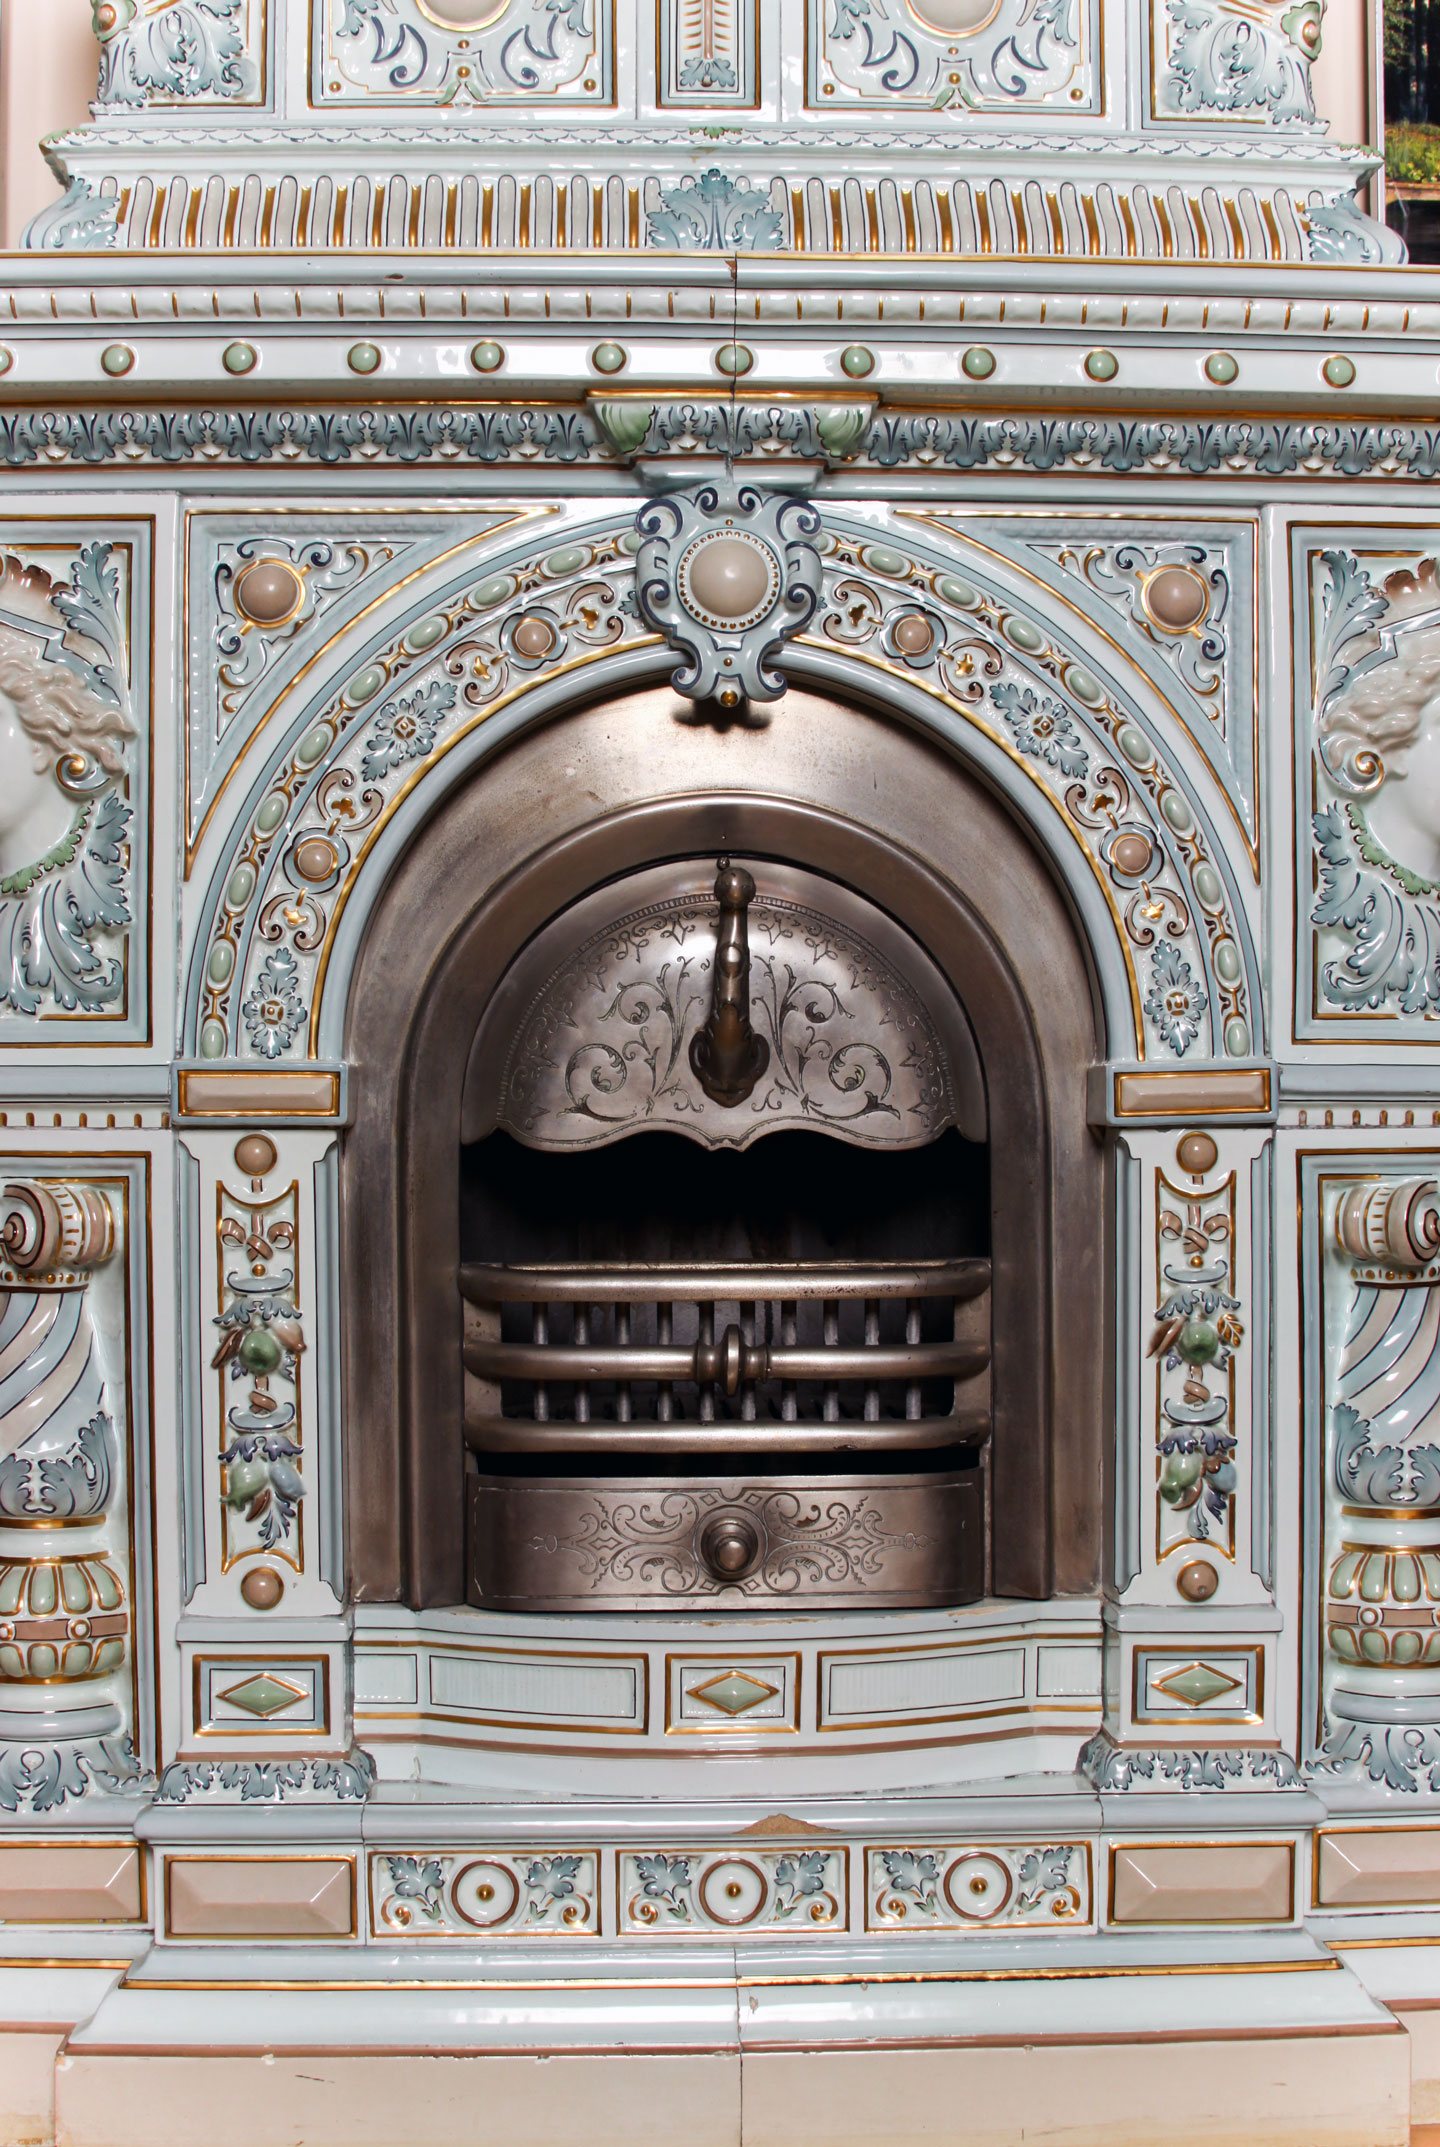 Detail on one of the 11 tile stoves in the Turnblad Mansion